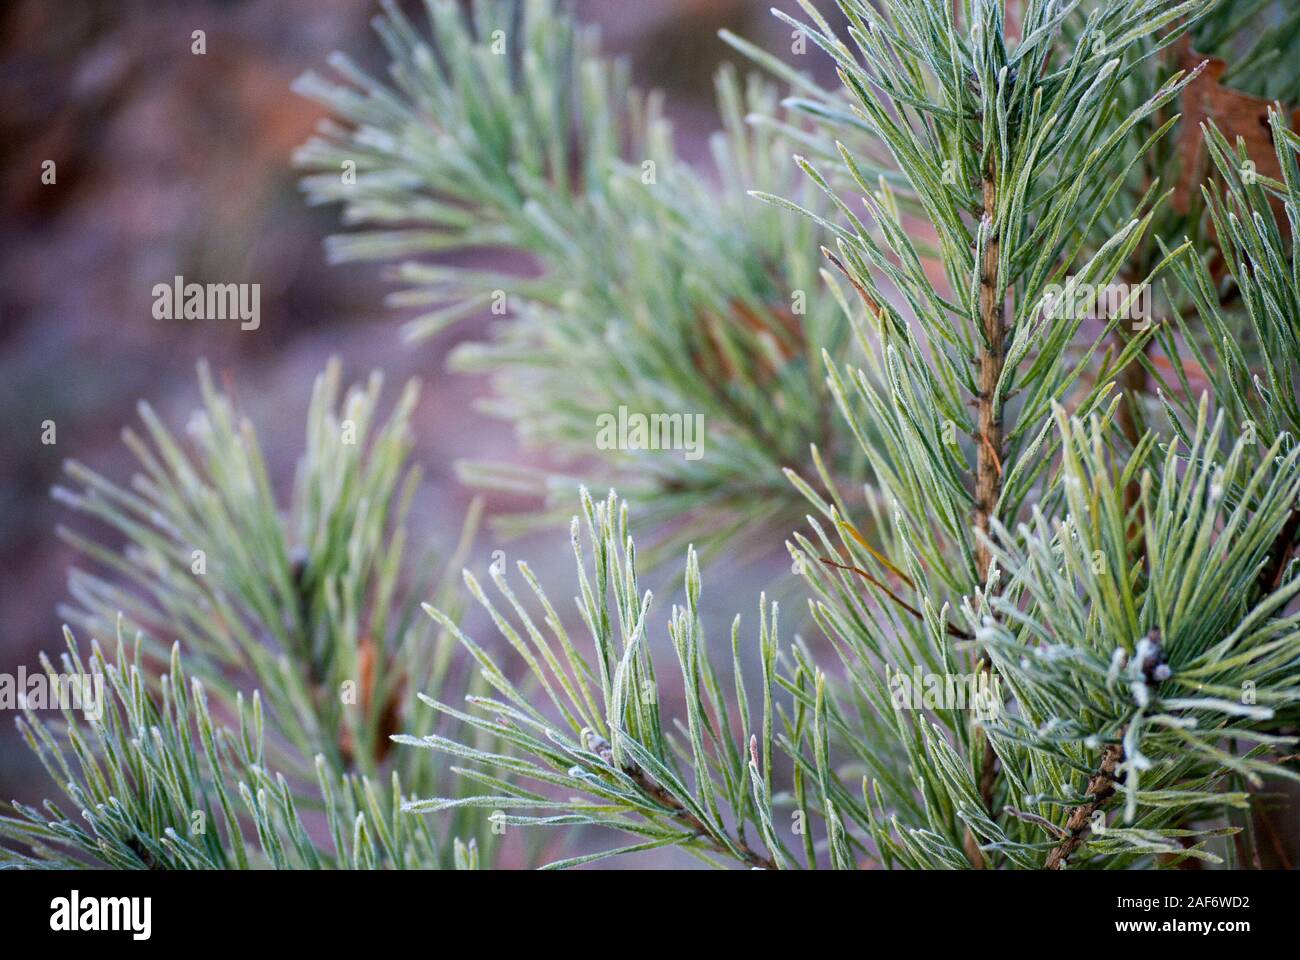 Fluffy branch of a young pine, closeup horizontal image Stock Photo